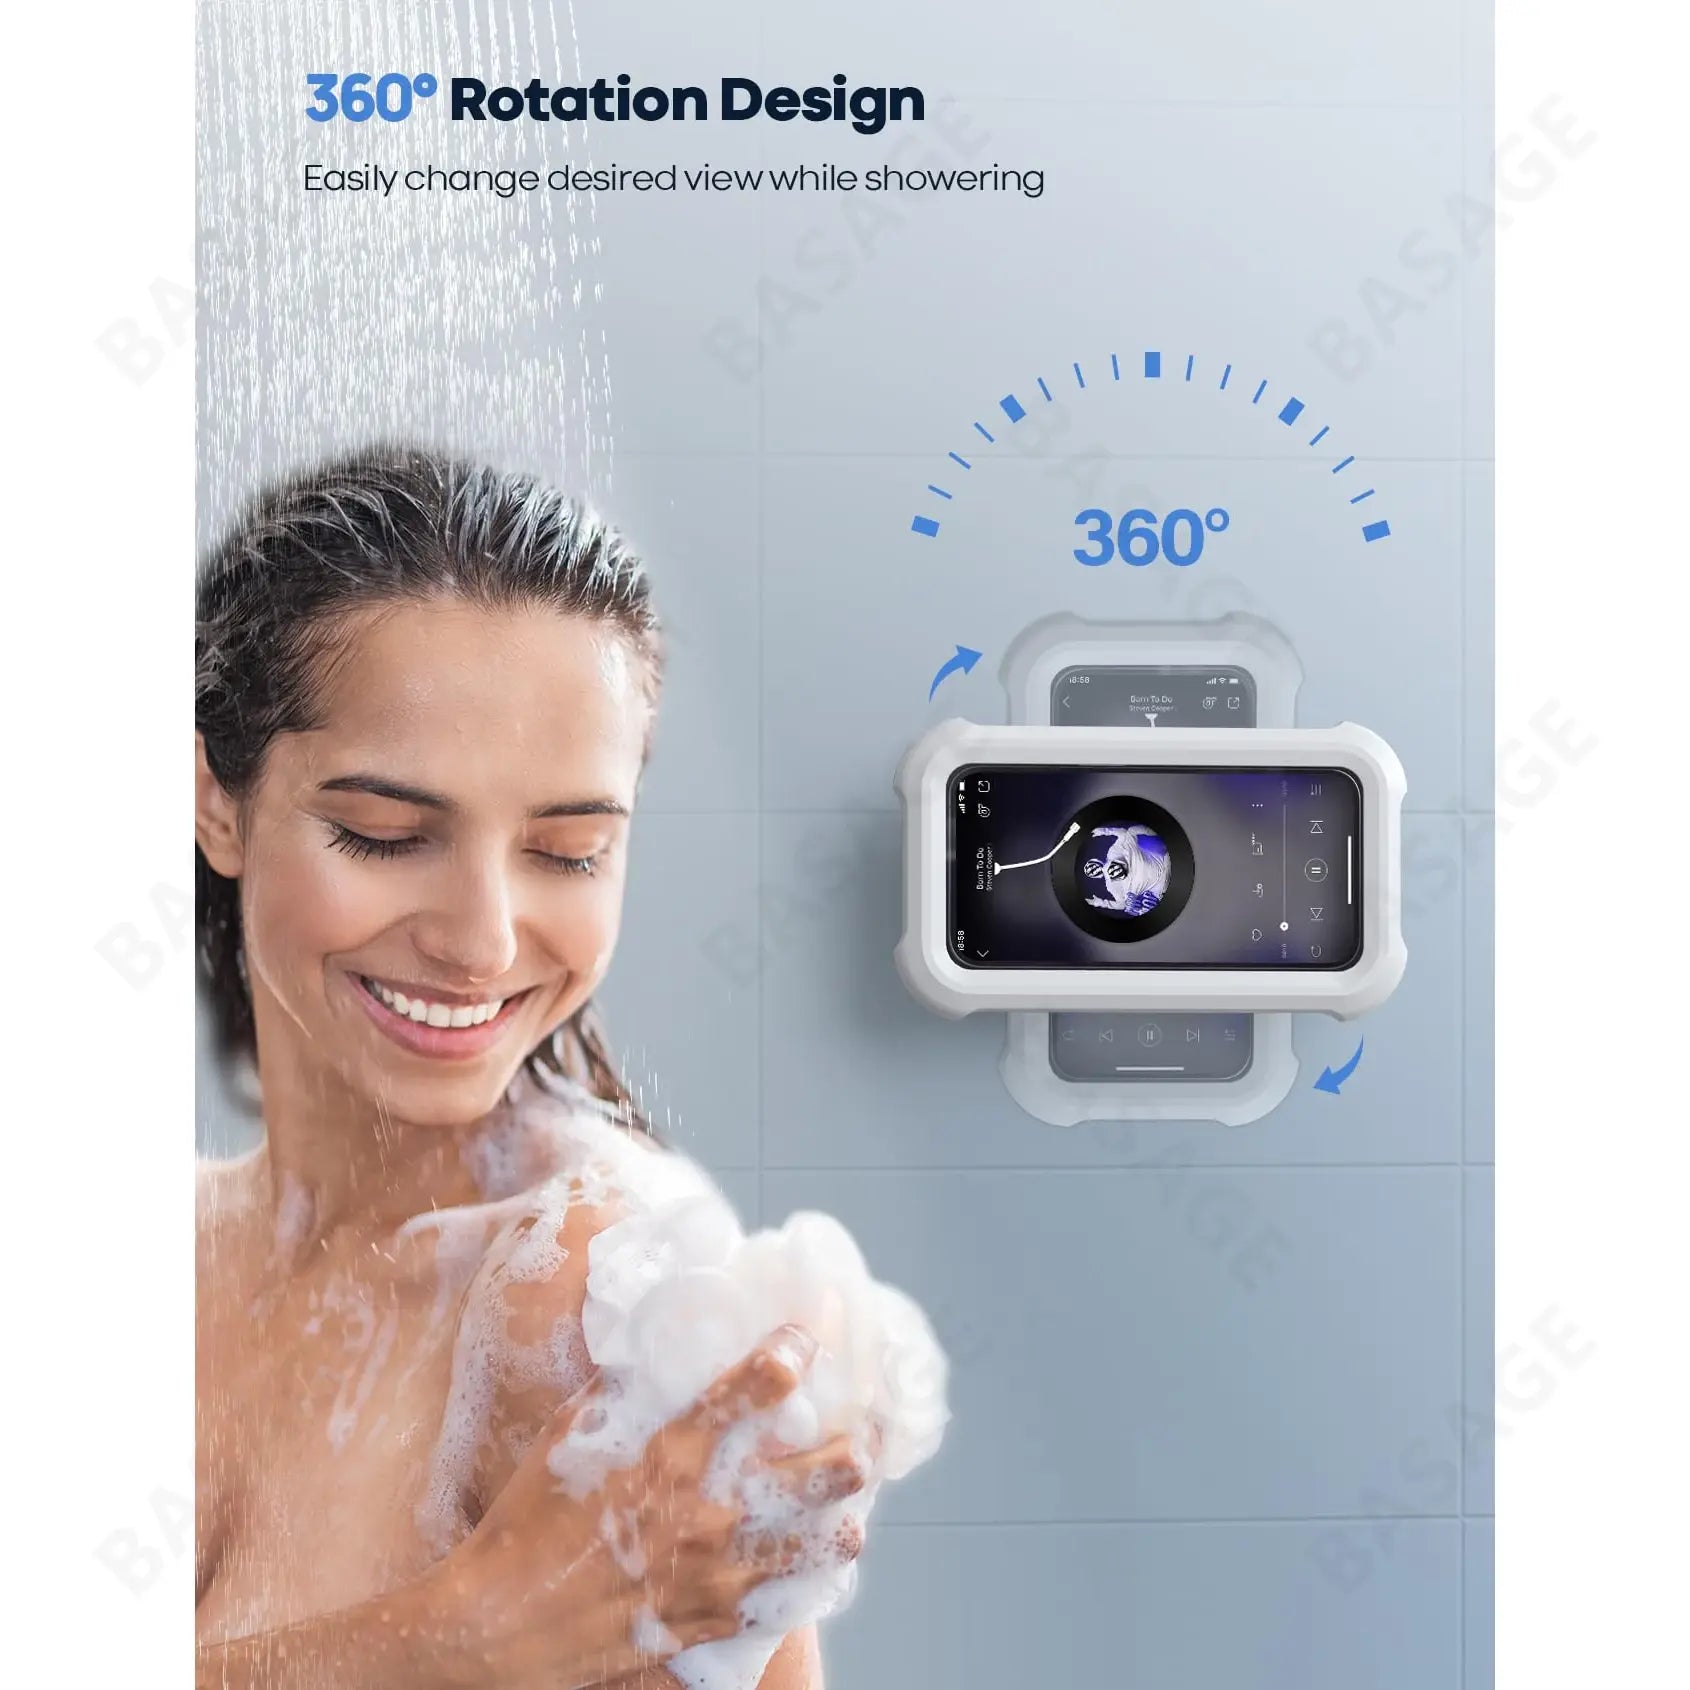 🚿 Waterproof Shower Phone Holder Waterproof Wall Mount, Bathroom Case Mounted Shelf Stand Suction Cup, Adhesive Touchable Phone Cradle with Glass Mirror Anti-Fog Screen for Bathtub Kitchen